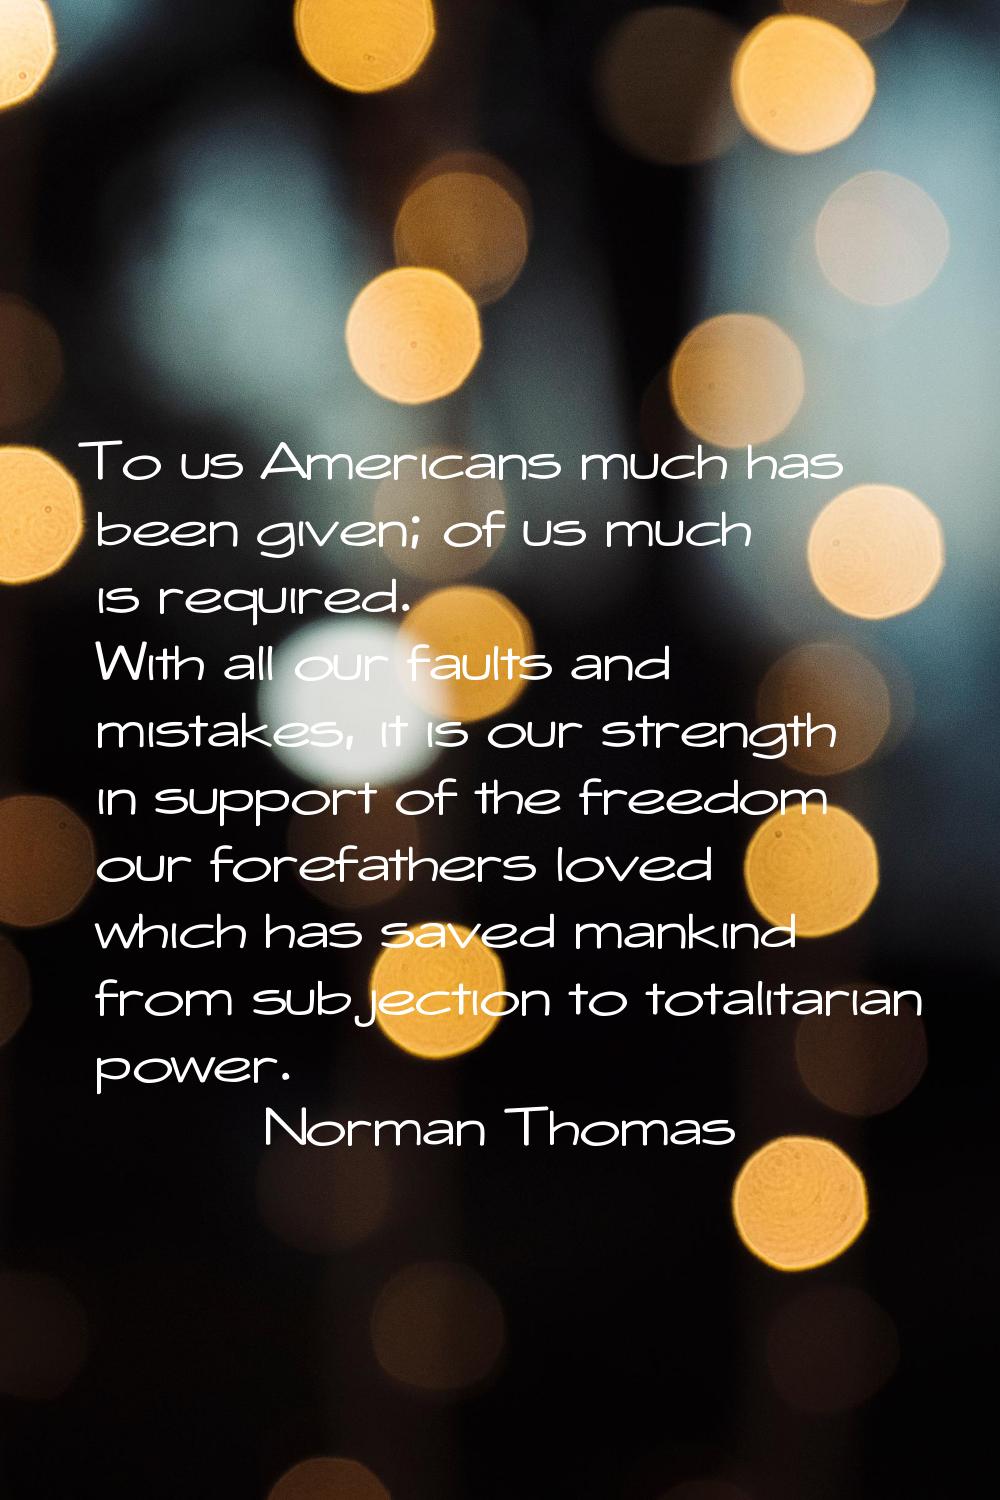 To us Americans much has been given; of us much is required. With all our faults and mistakes, it i